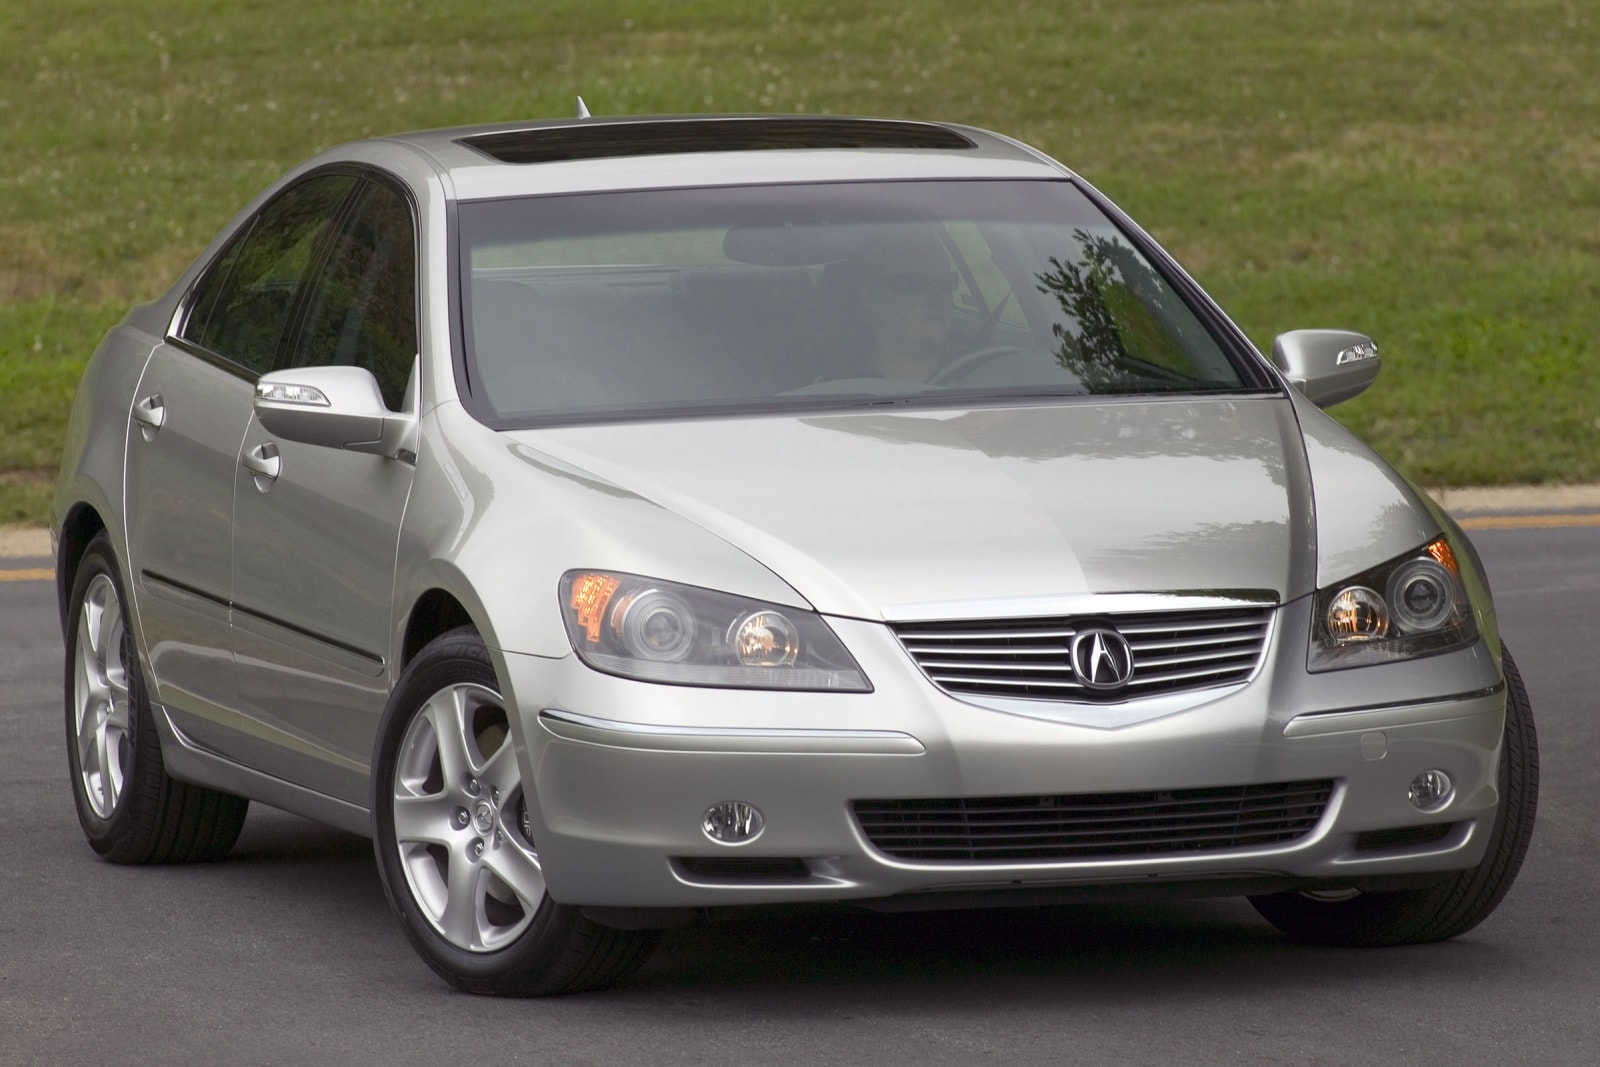 2007 Acura RL Review & Ratings | Edmunds